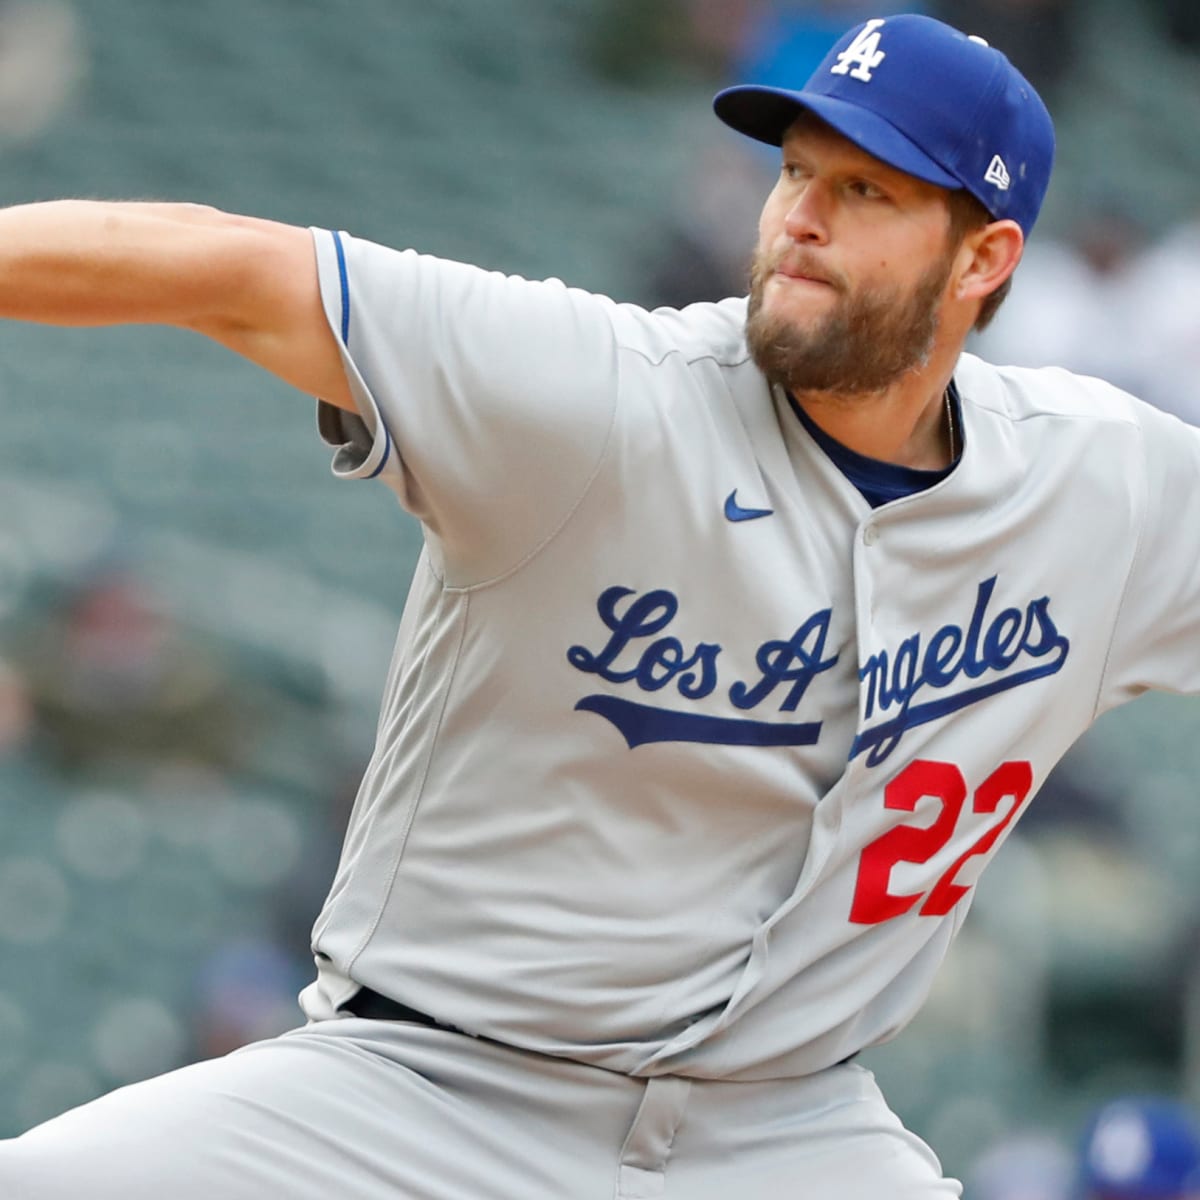 Pulling Clayton Kershaw from perfect game was bad for baseball